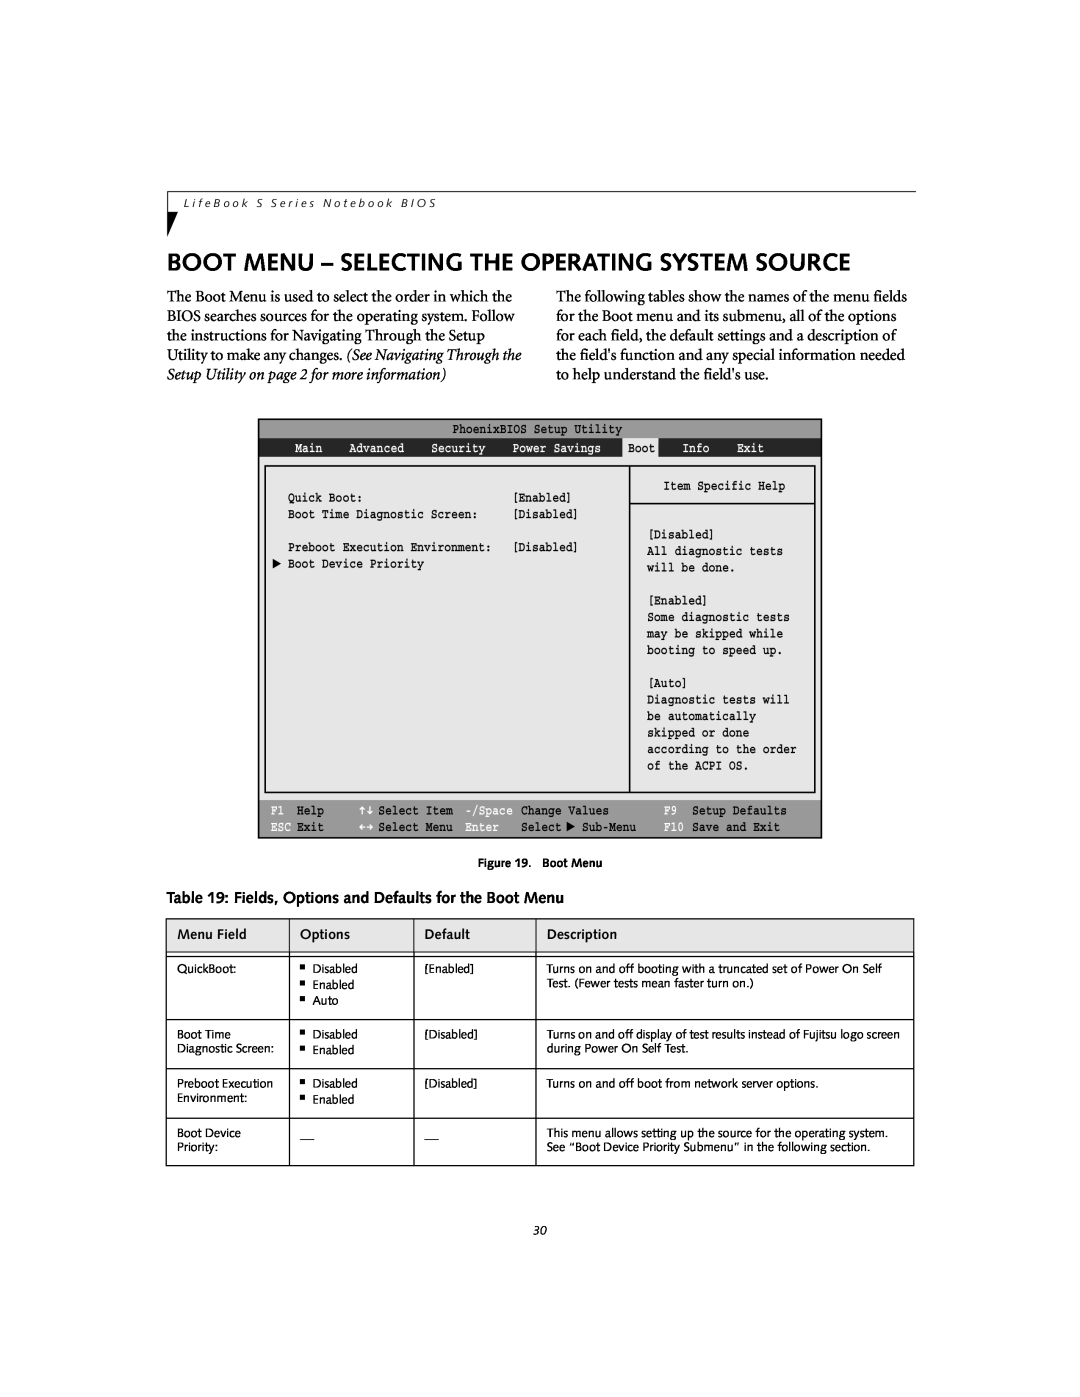 Fujitsu Siemens Computers S6010 Boot Menu - Selecting The Operating System Source, Main, Advanced, Security, Info, Exit 